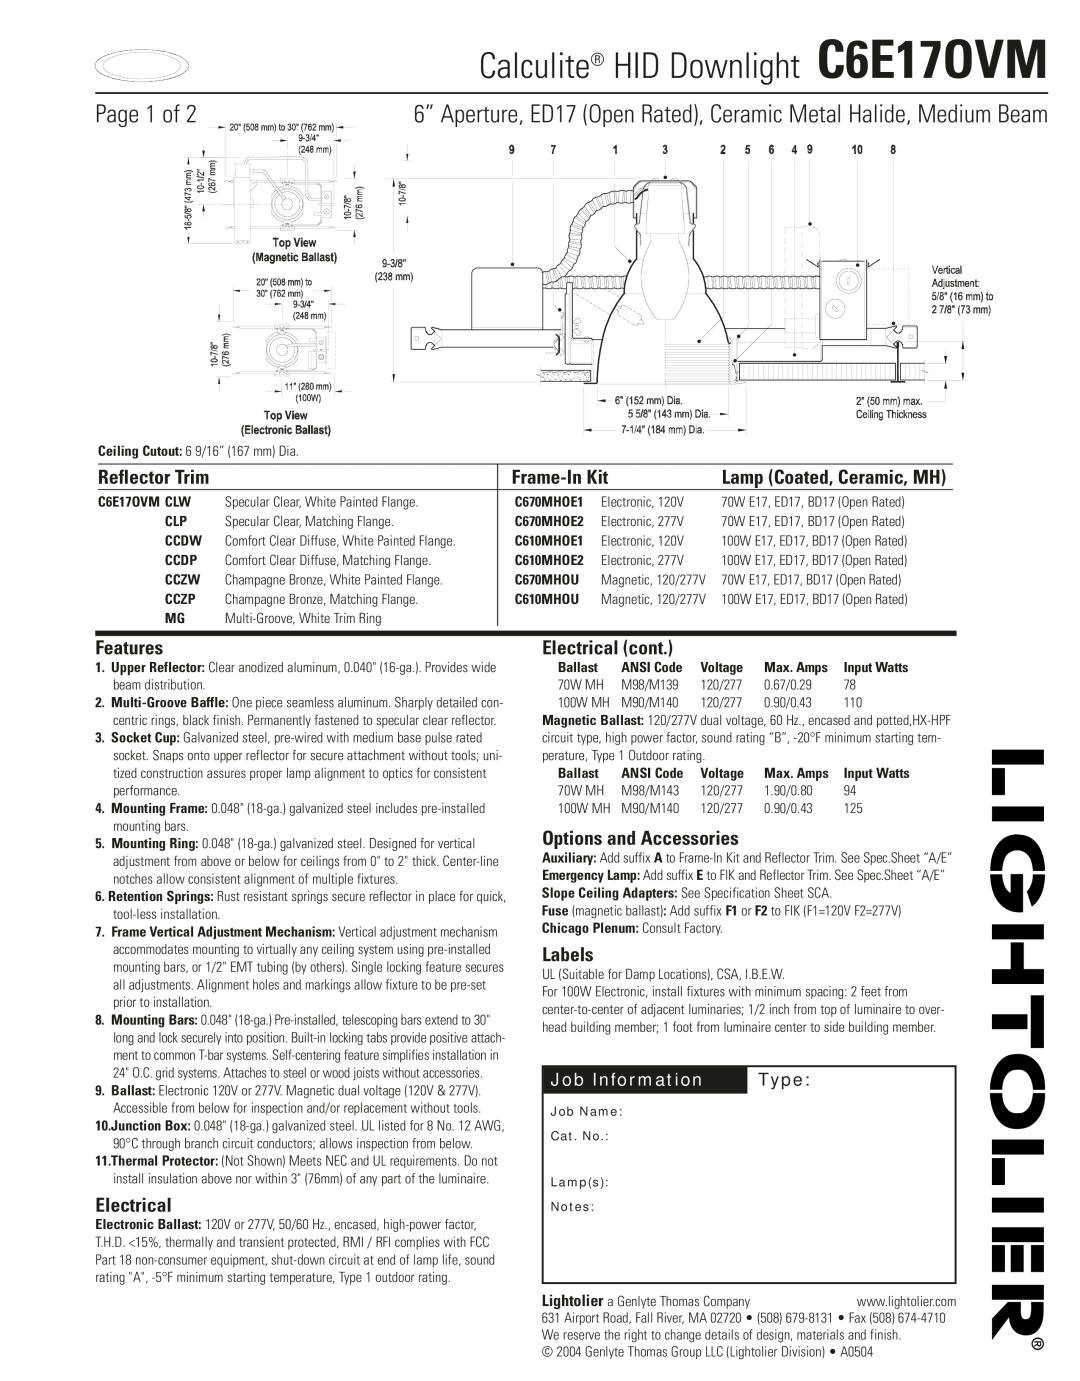 Lightolier specifications Calculite HID Downlight C6E17OVM, Page 1 of, Reflector Trim, Job Information, Type, Features 